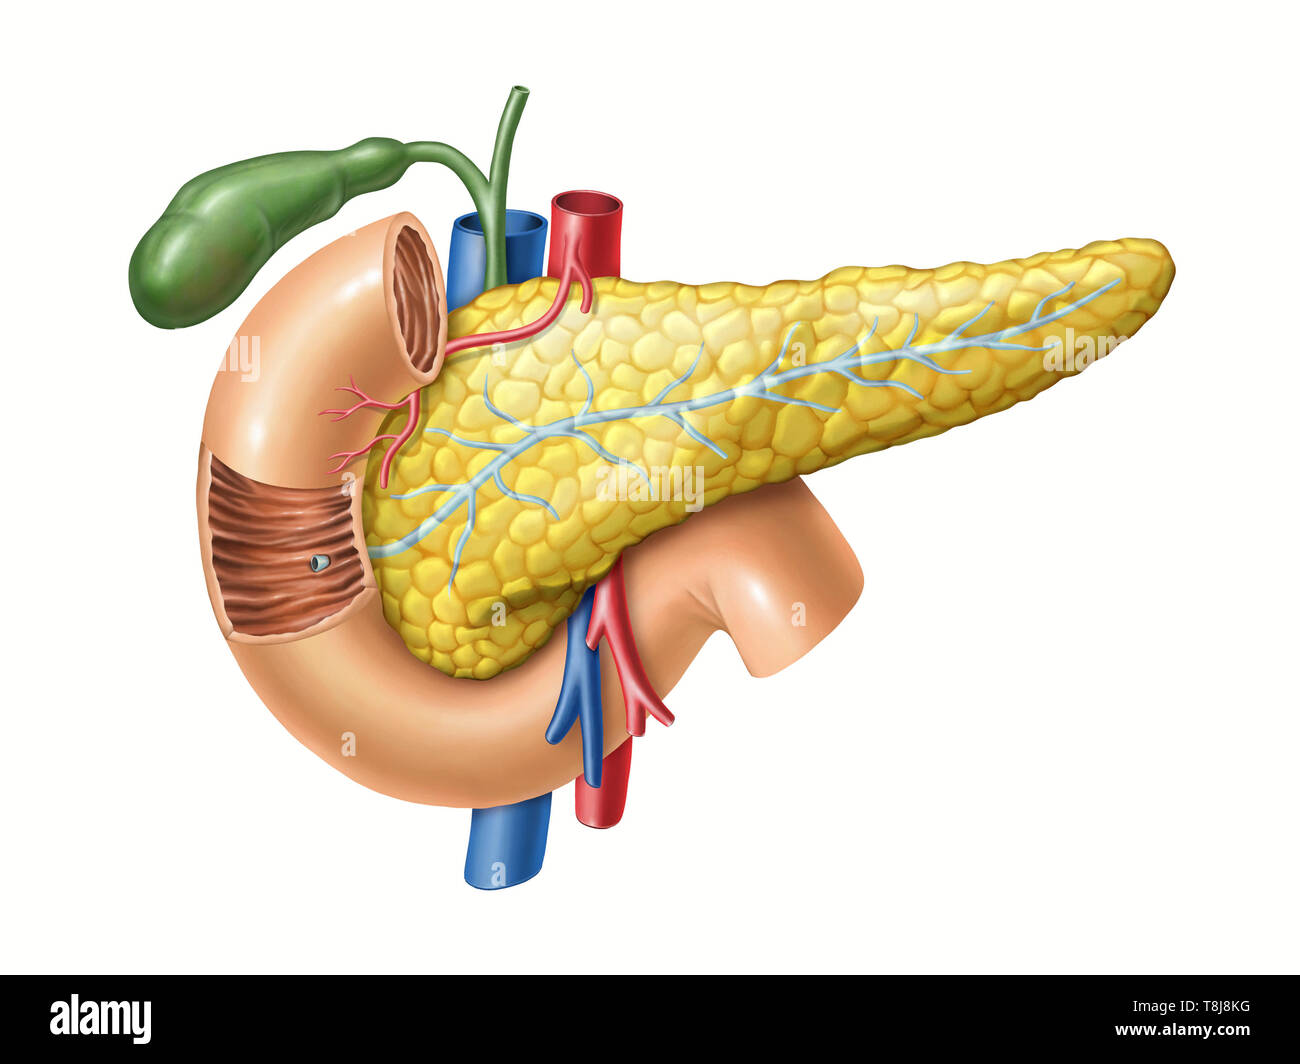 Anatomy drawing showing the pancreas, duodenum, and gallbladder. Digital illustration Stock Photo